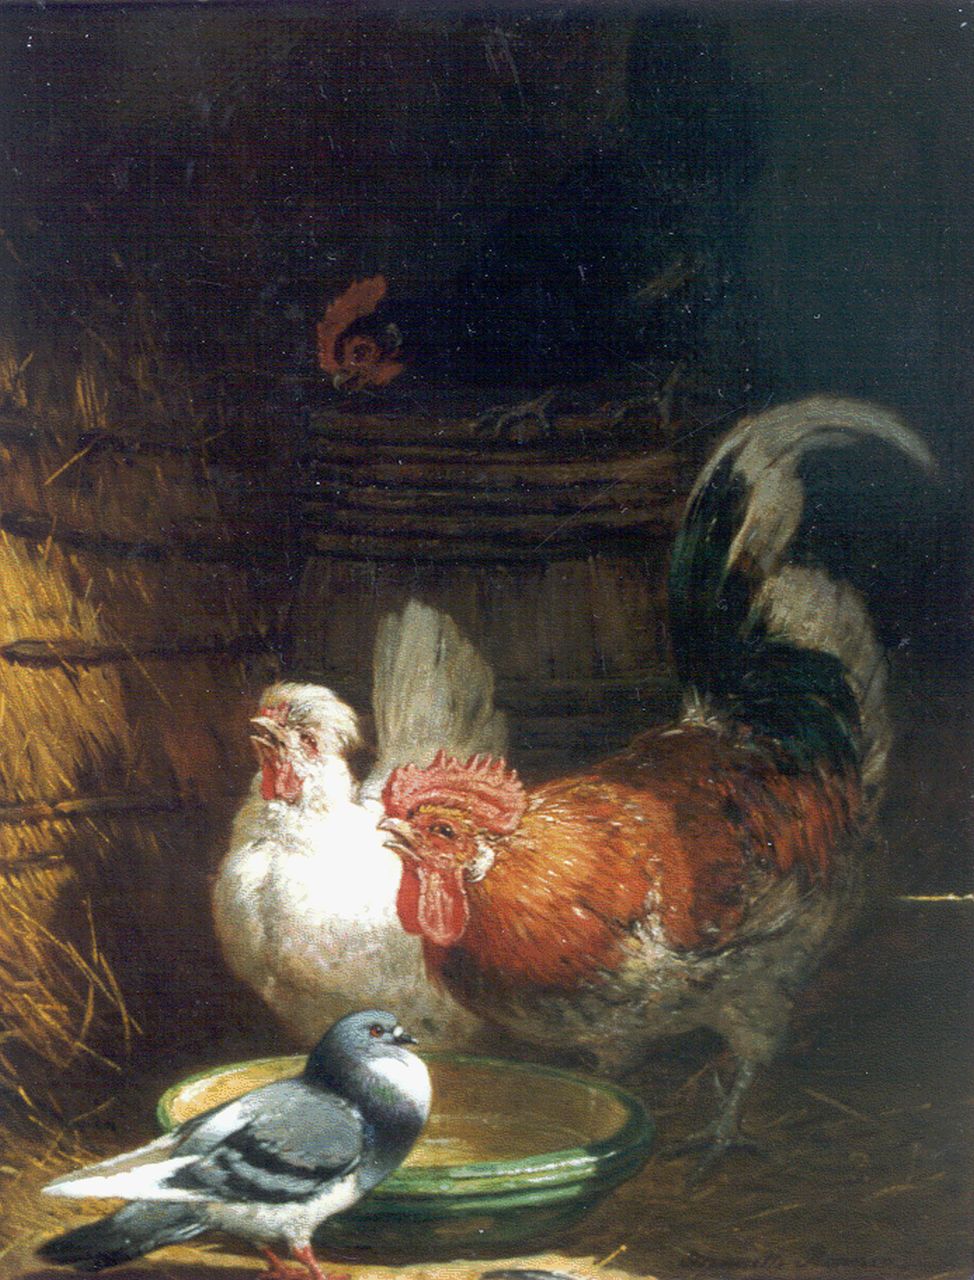 Ronner-Knip H.  | Henriette Ronner-Knip, A stable interior with poultry, oil on panel 40.1 x 31.4 cm, signed l.r.